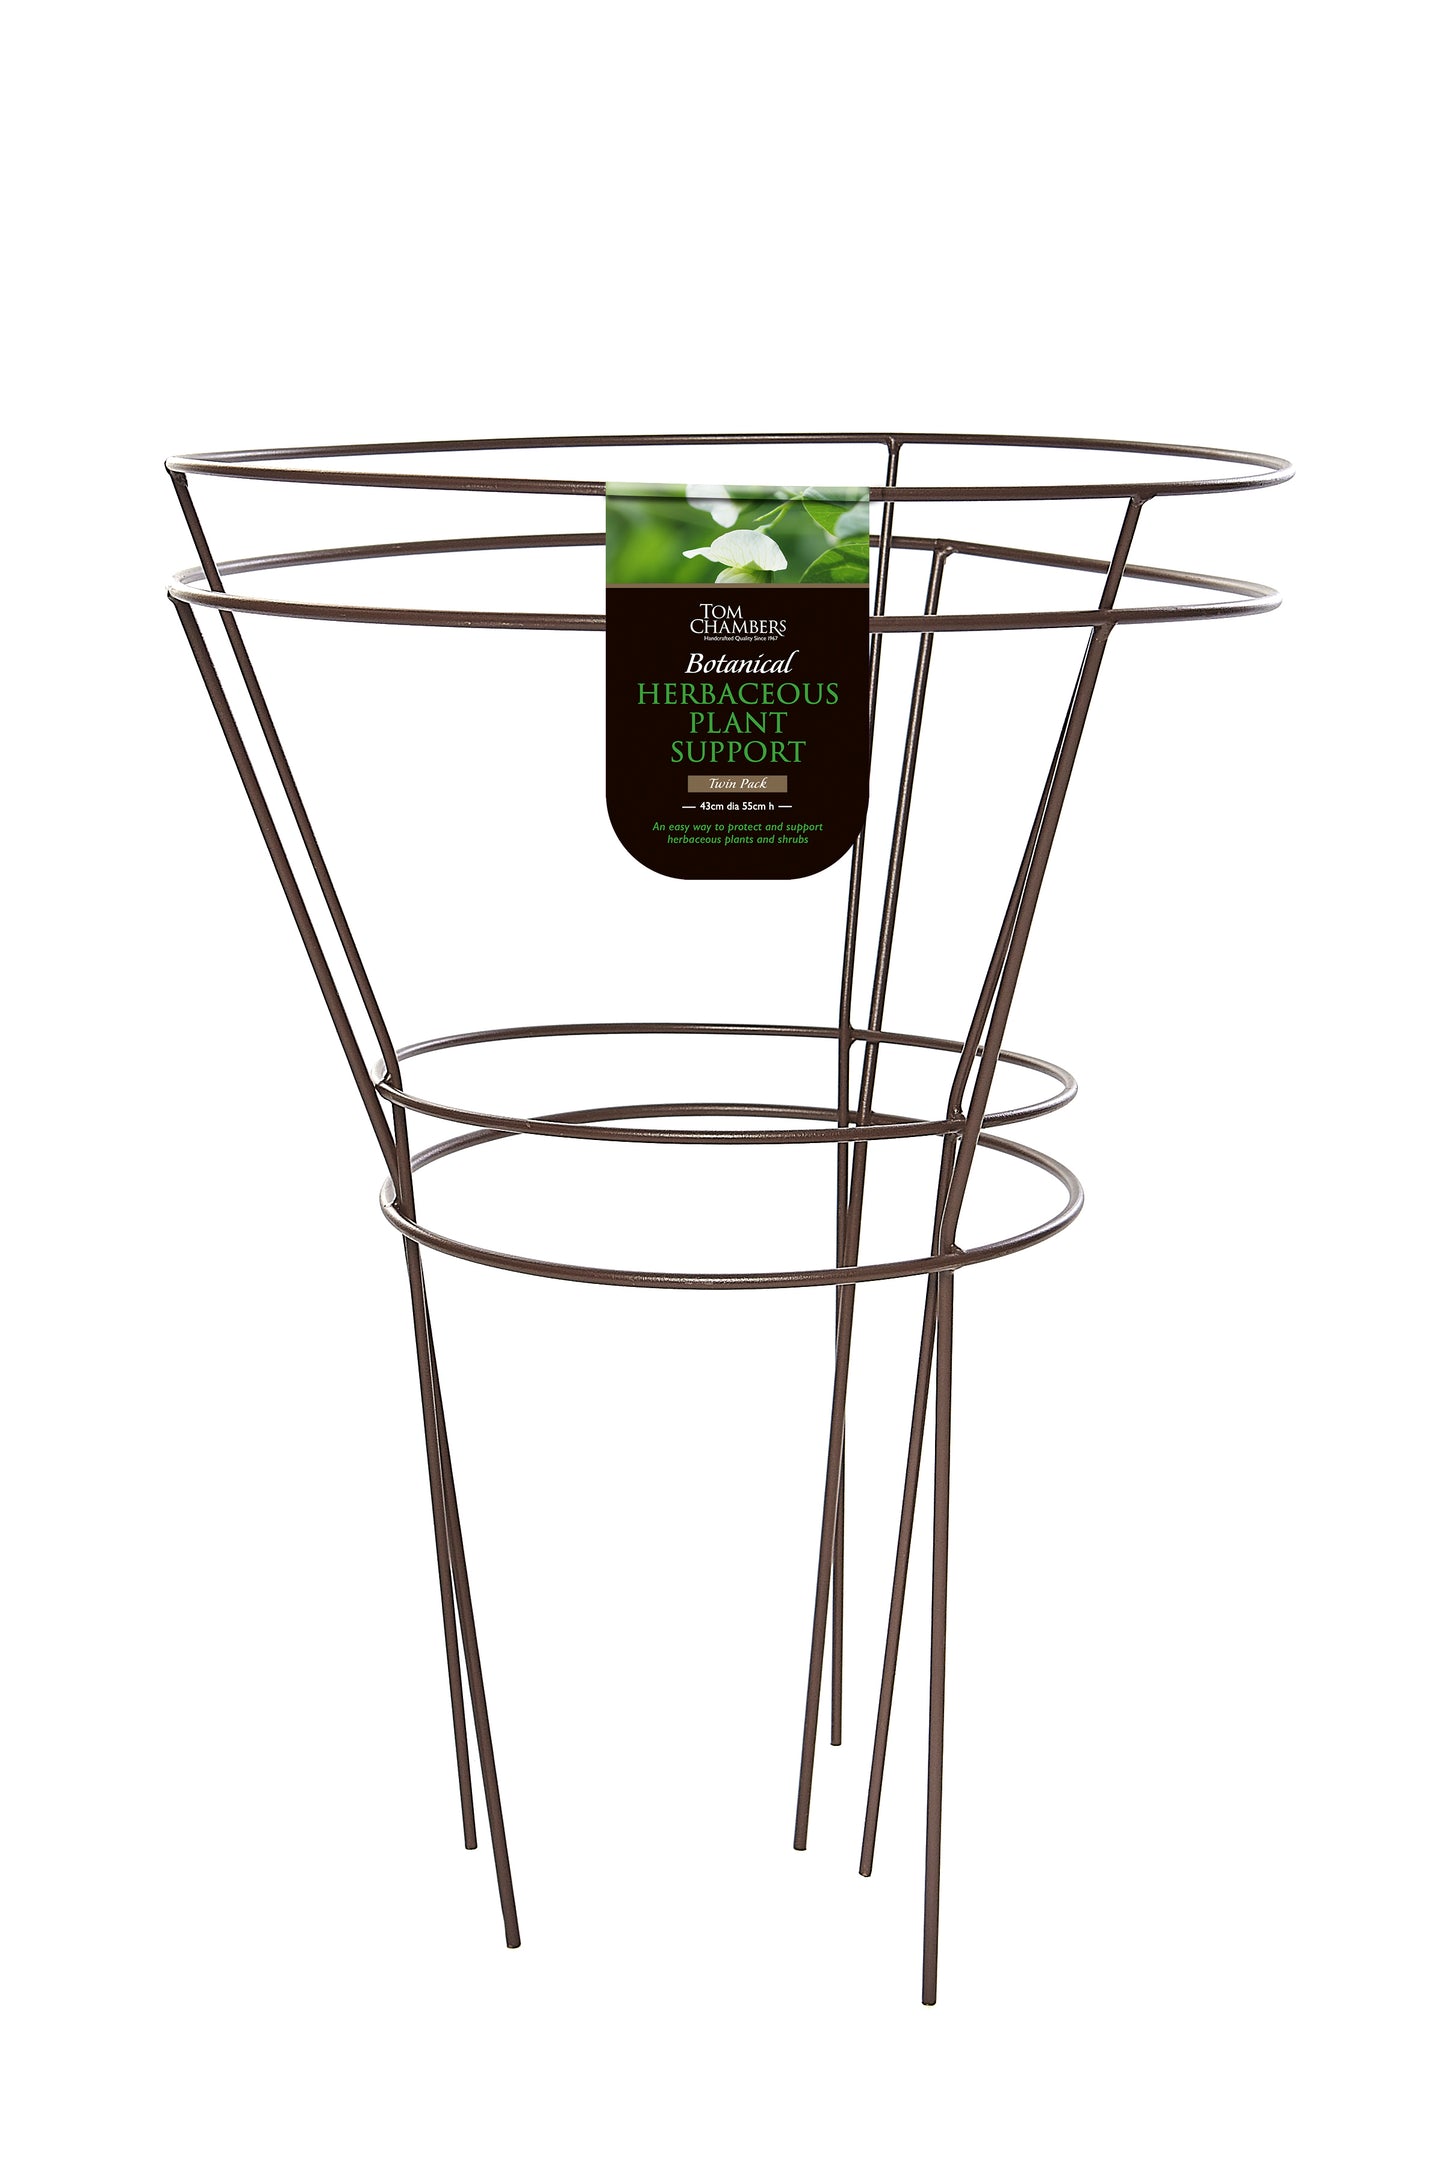 Tom Chambers Botanical Herbaceous Plant Support 2-Pack